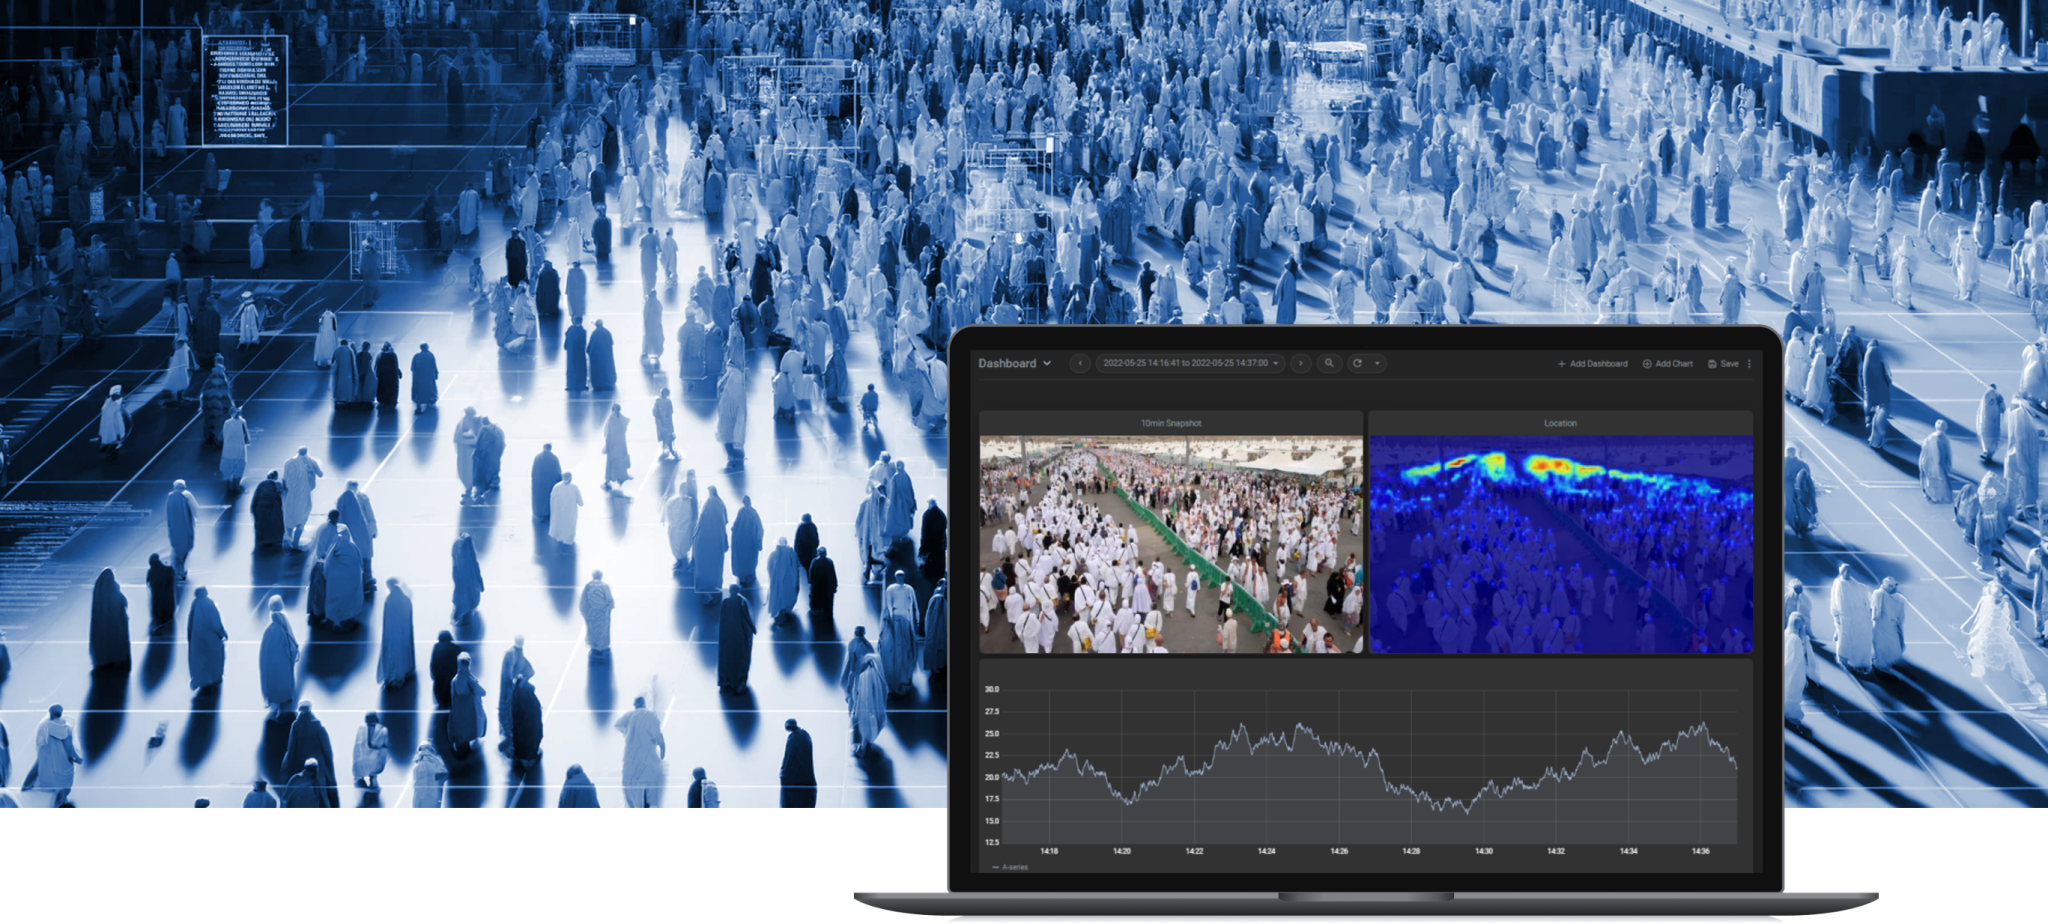 Viso Suite infrastructure for crowd control, safety, and customer satisfaction